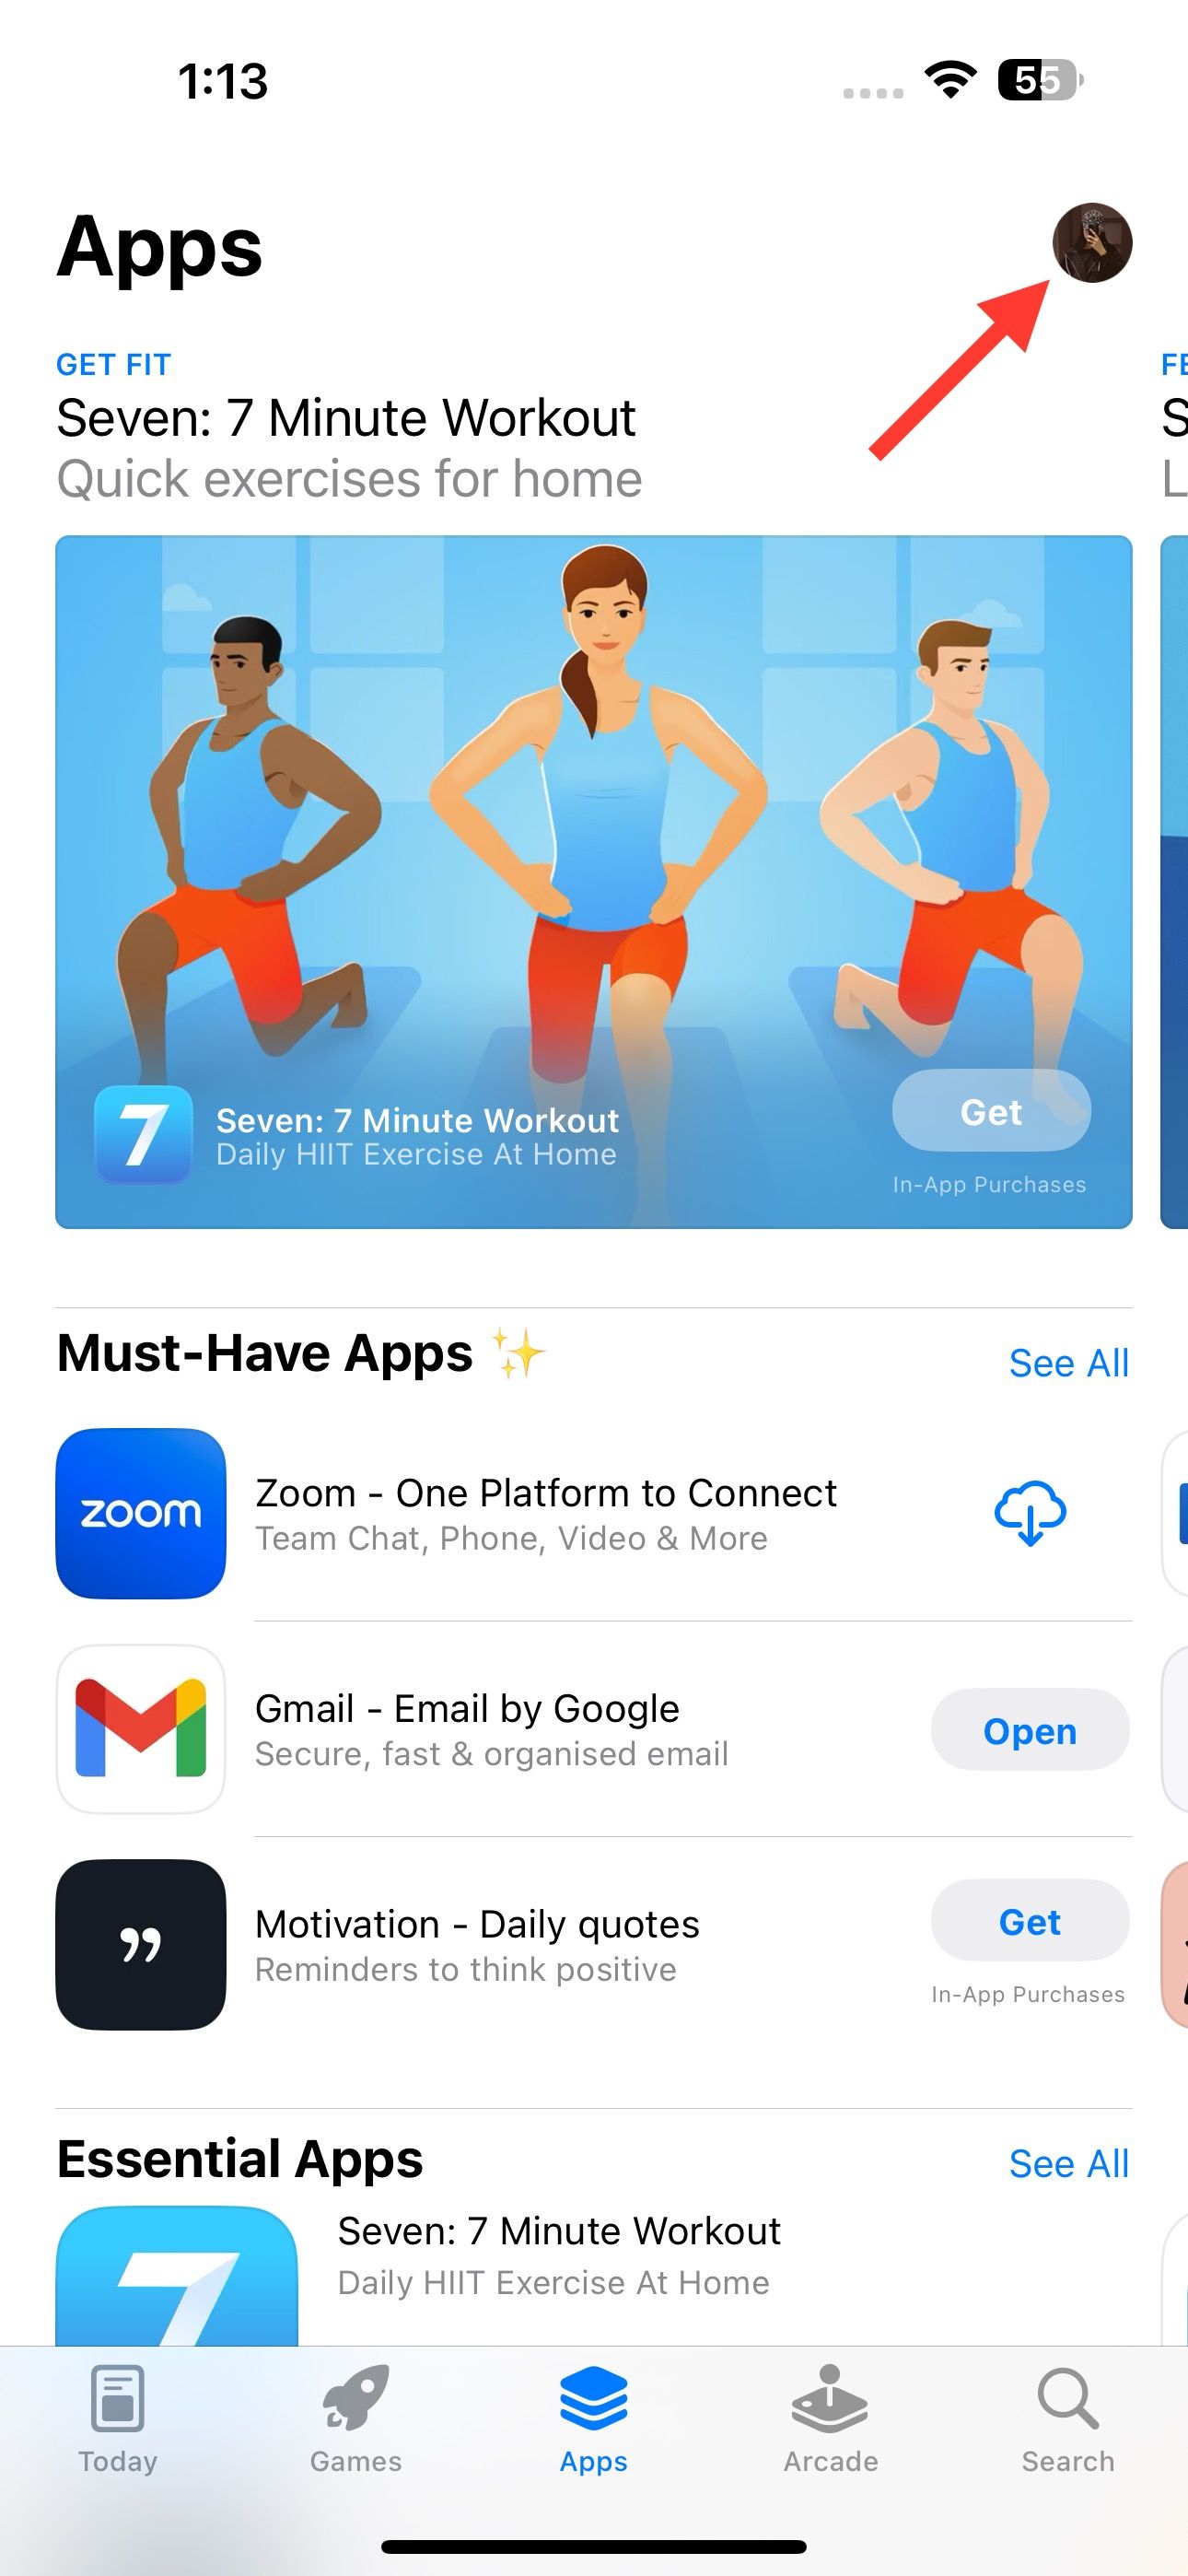 Apple App Store showing the user profile icon in the upper right corner.